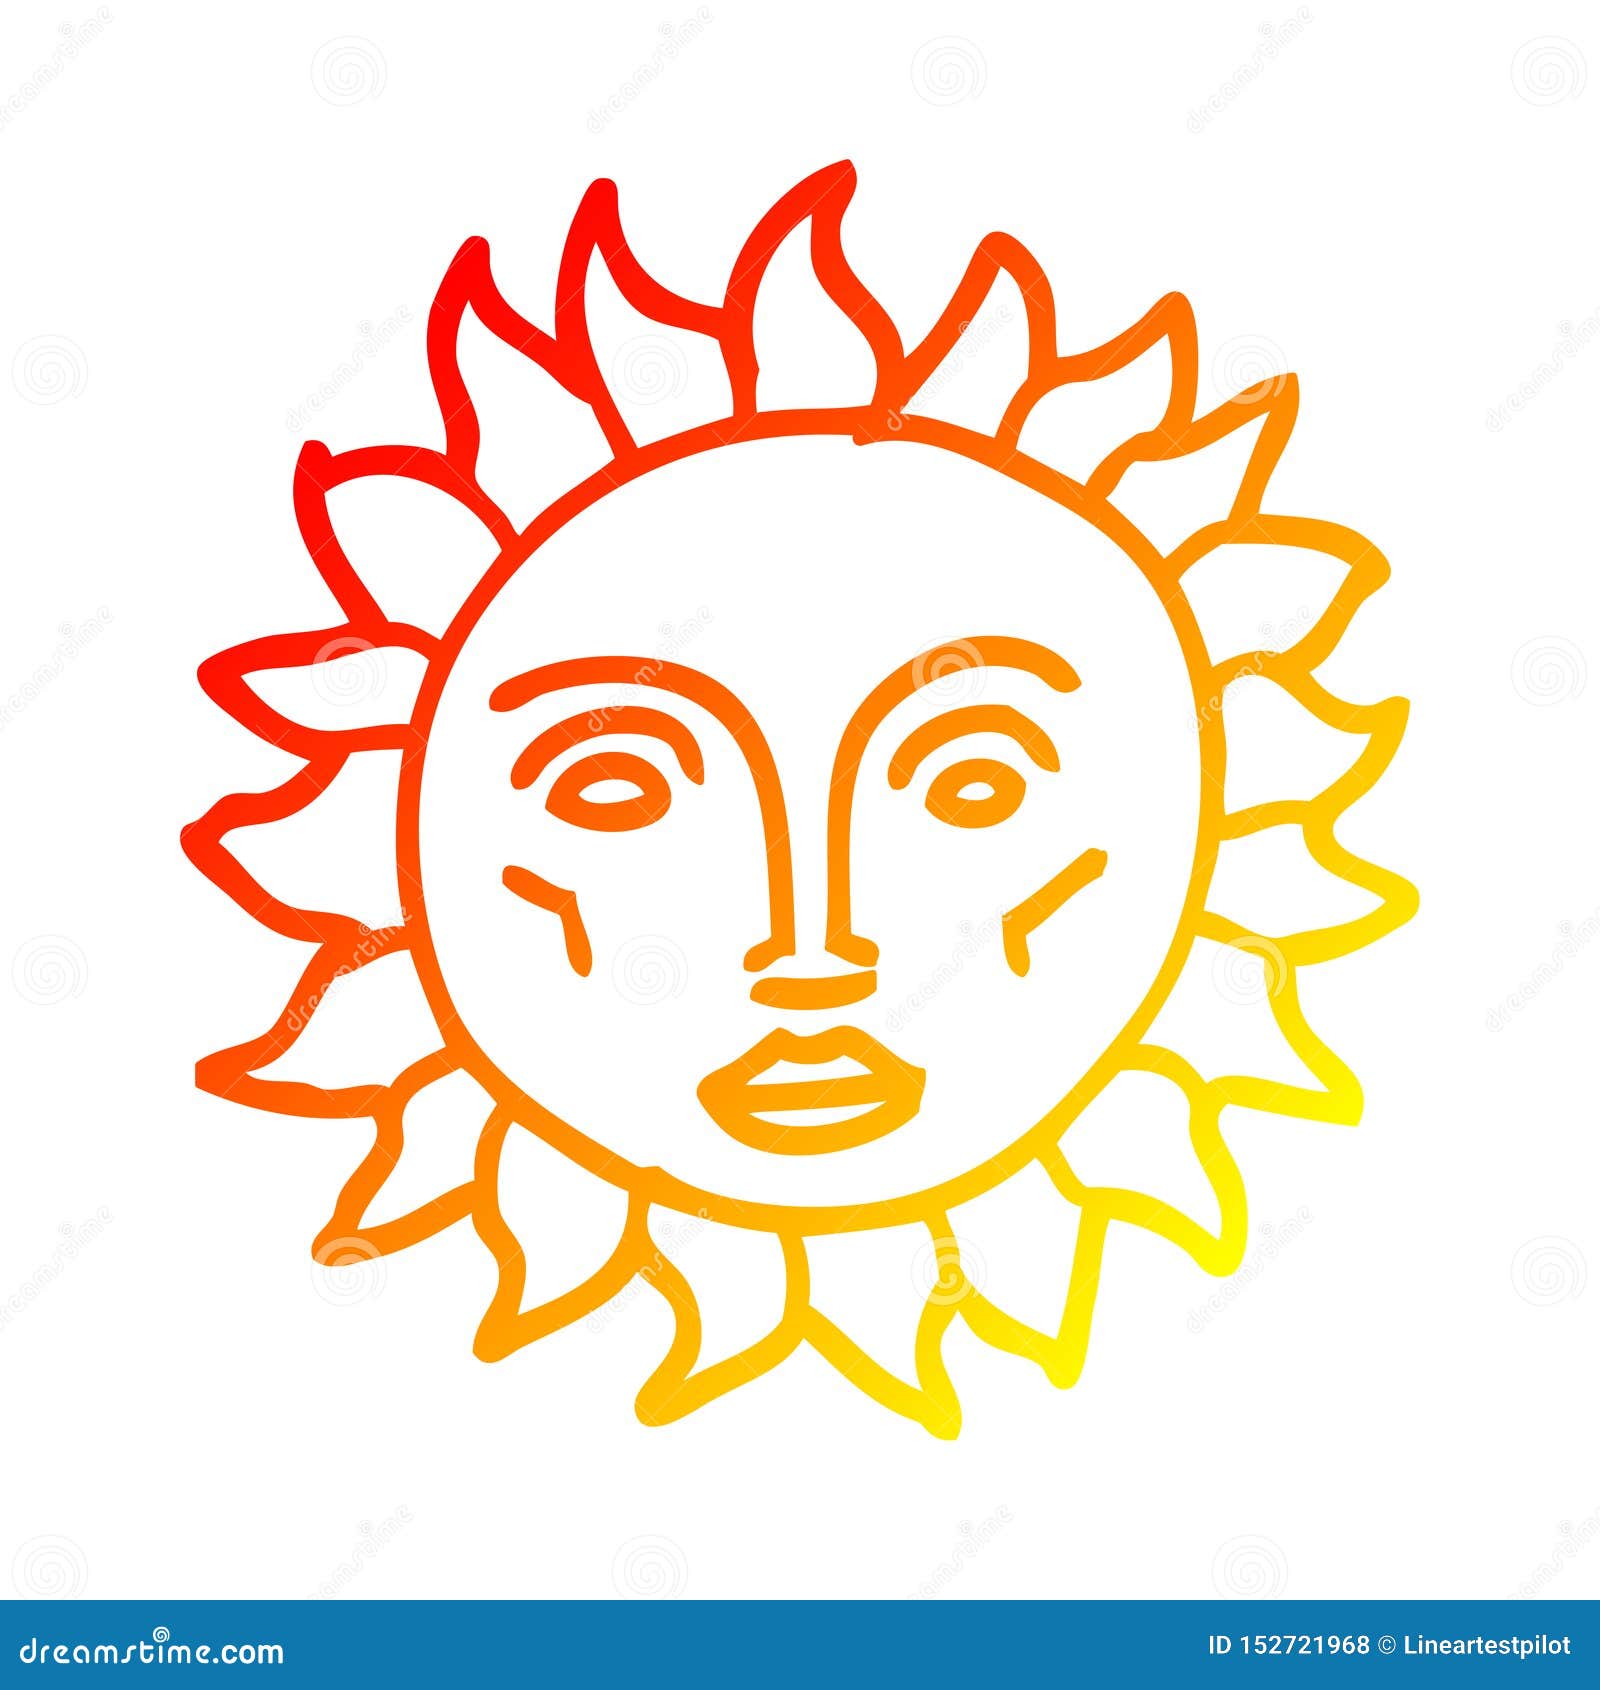 How to Draw a Sun | Easy Summer Art for Kids - Arty Crafty Kids